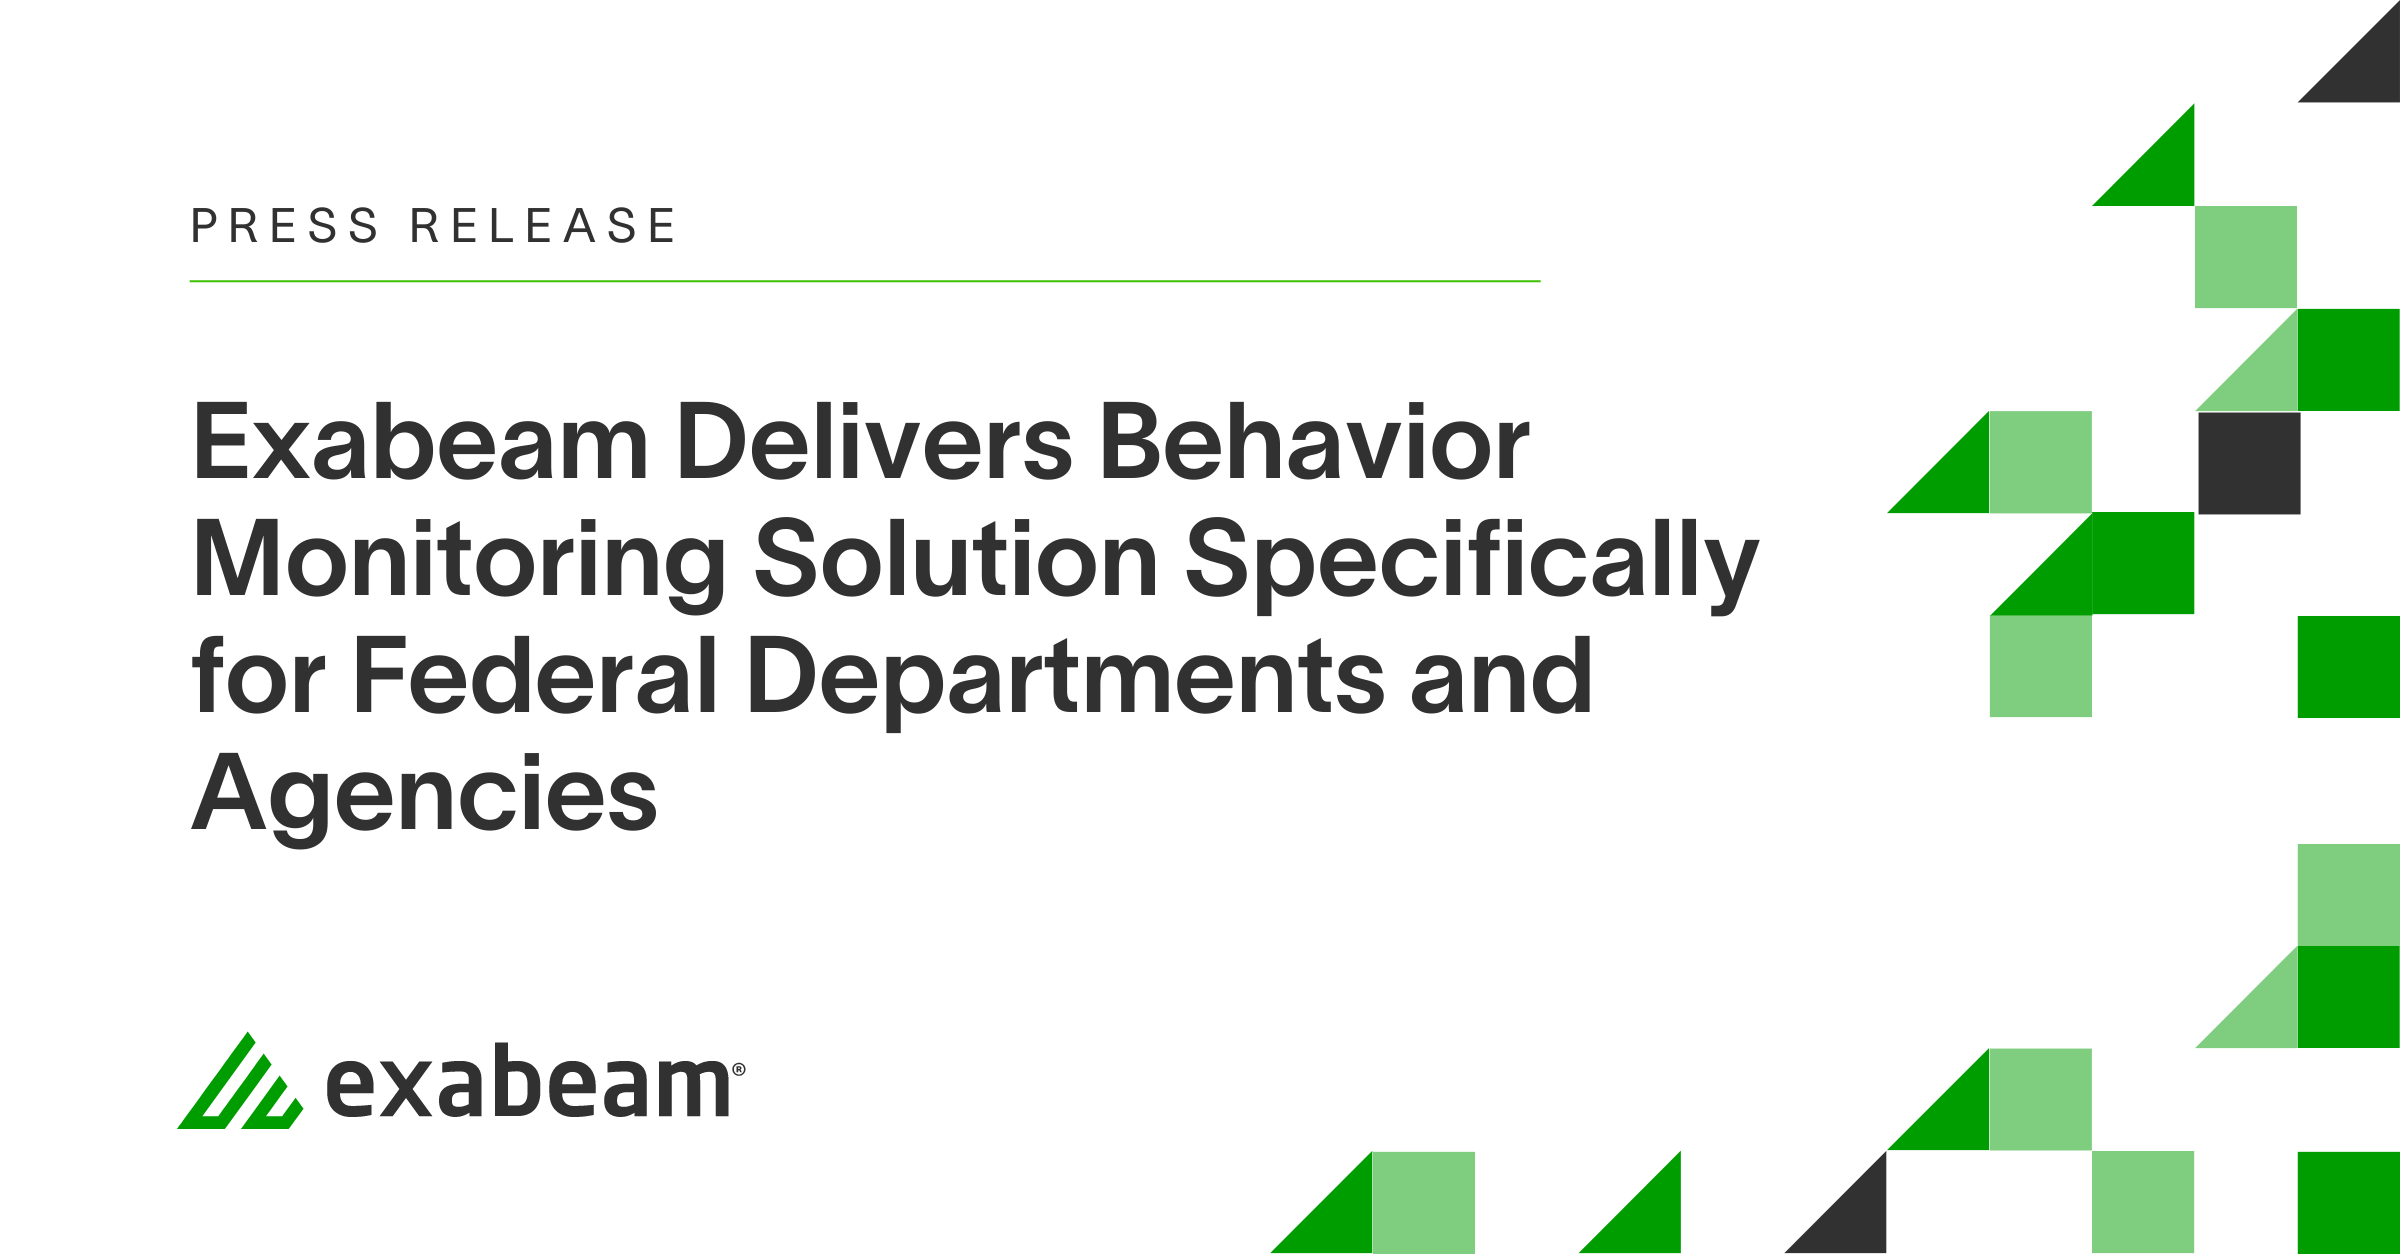 Exabeam Delivers Behavior Monitoring Solution Specifically for Federal Departments and Agencies